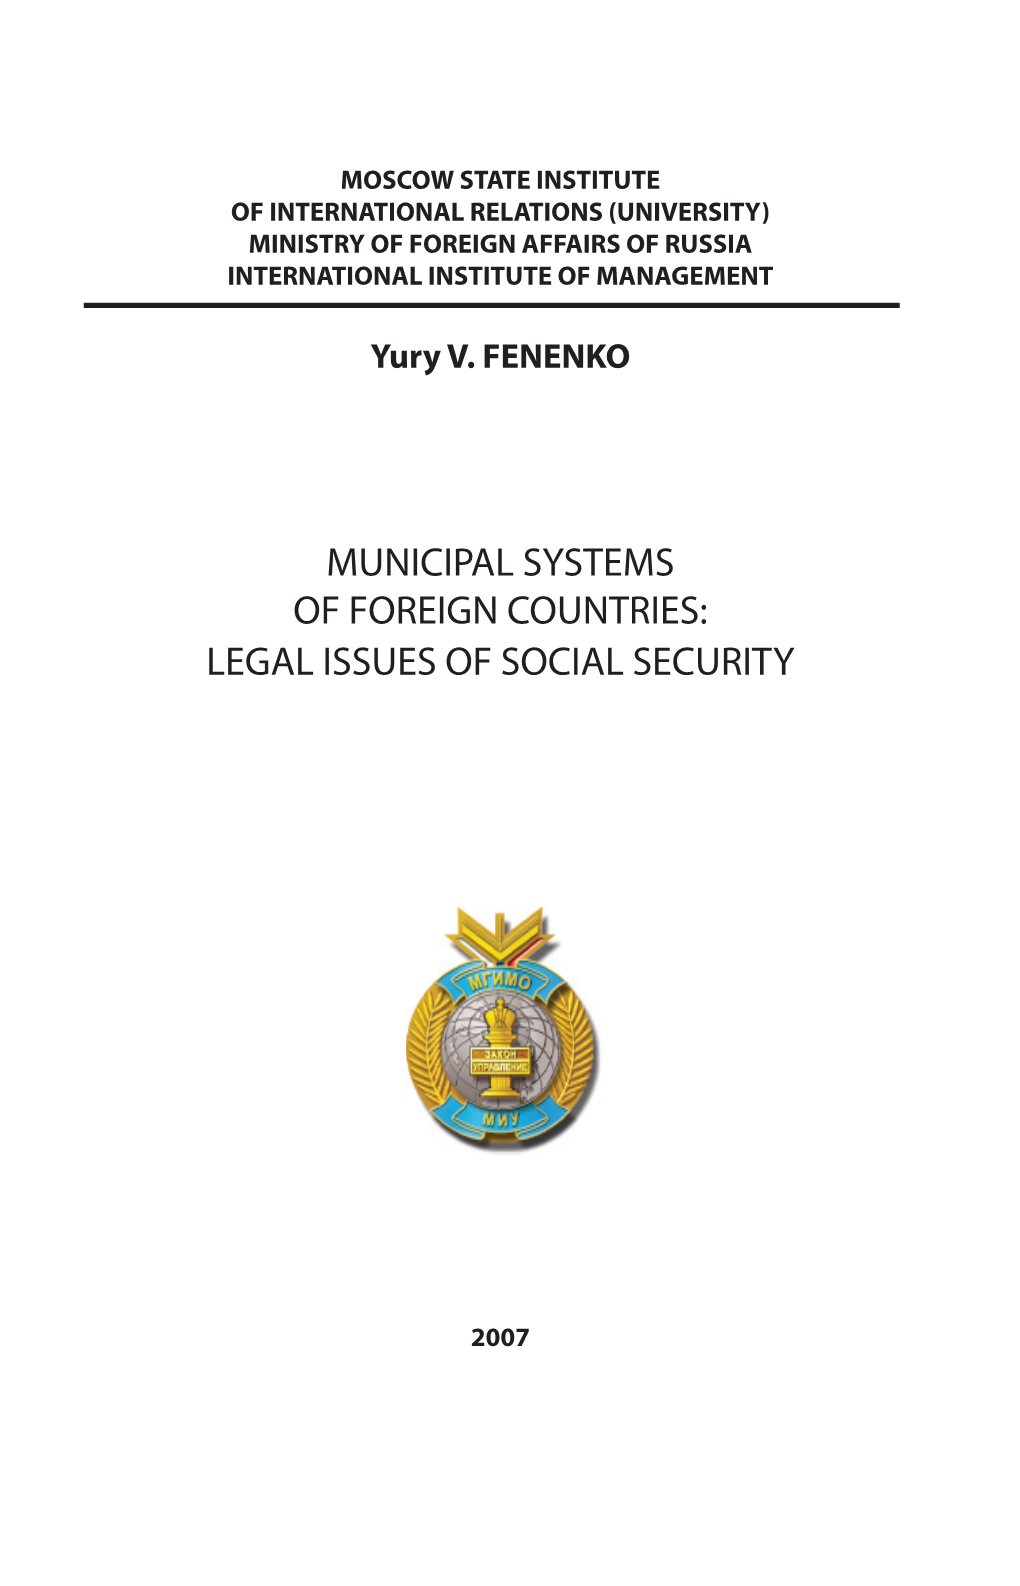 Municipal Systems of Foreign Countries: Legal Issues of Social Security